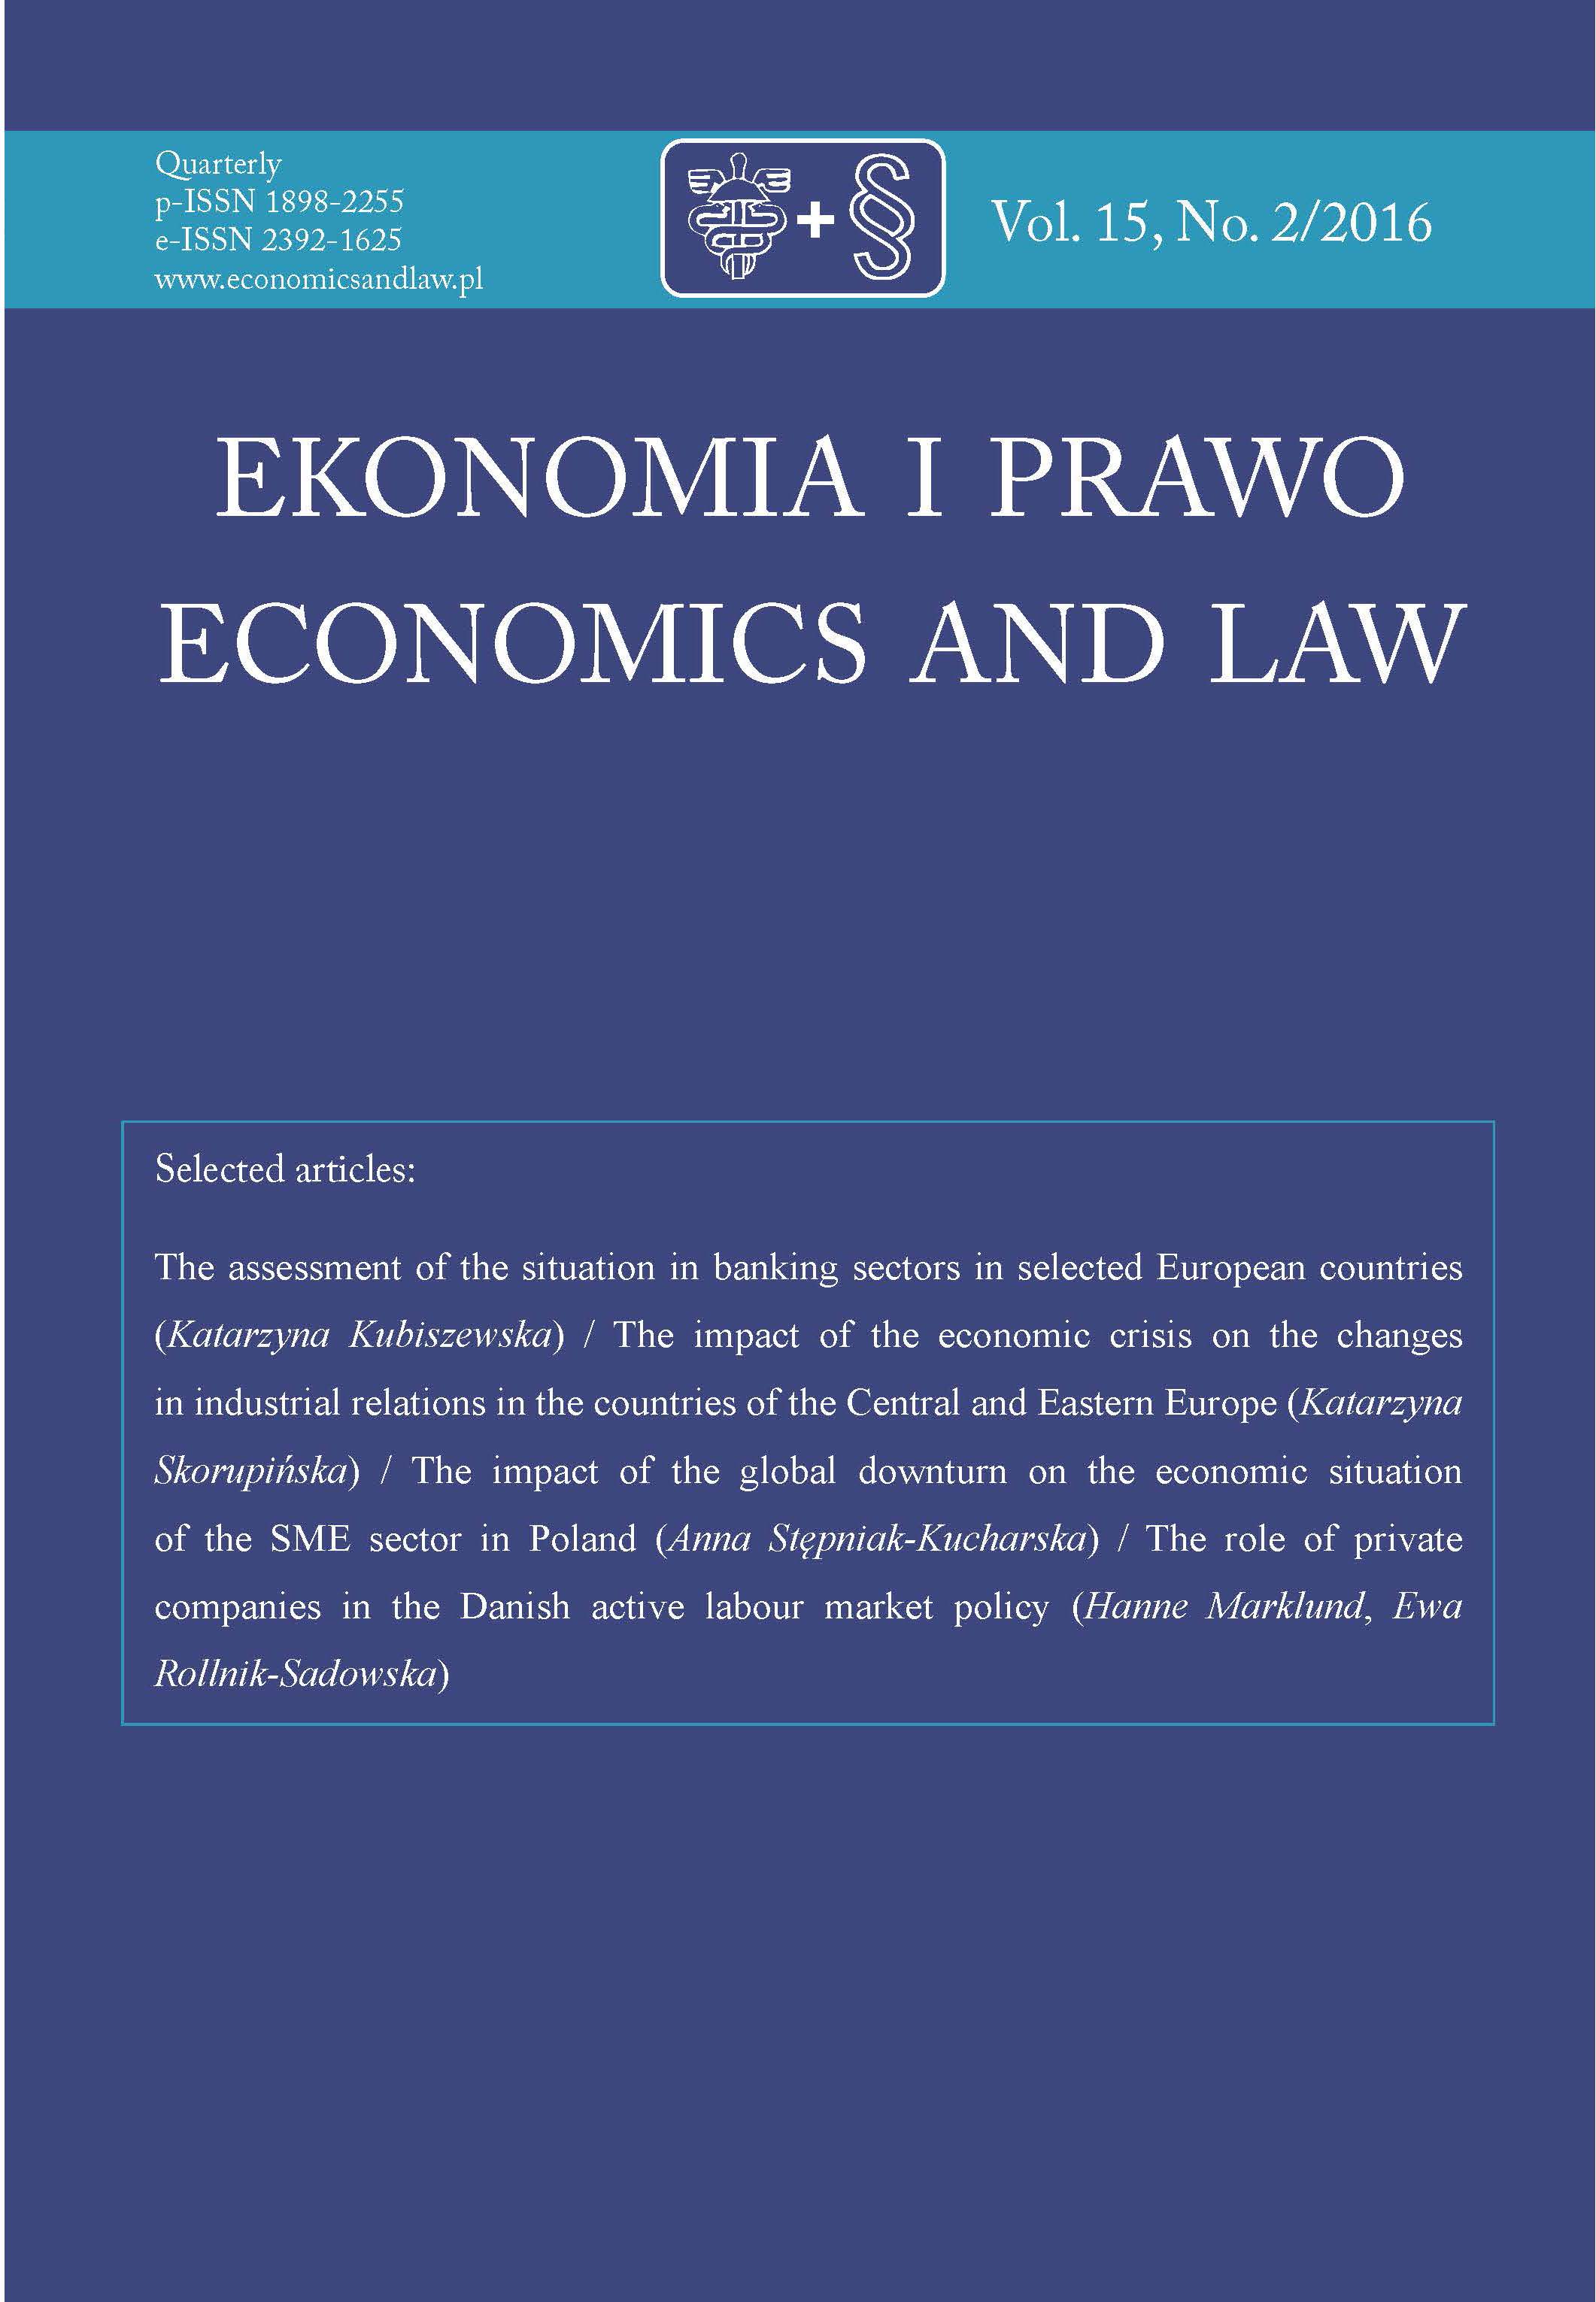 THE IMPACT OF THE GLOBAL DOWNTURN ON THE ECONOMIC SITUATION OF THE SME SECTOR IN POLAND Cover Image